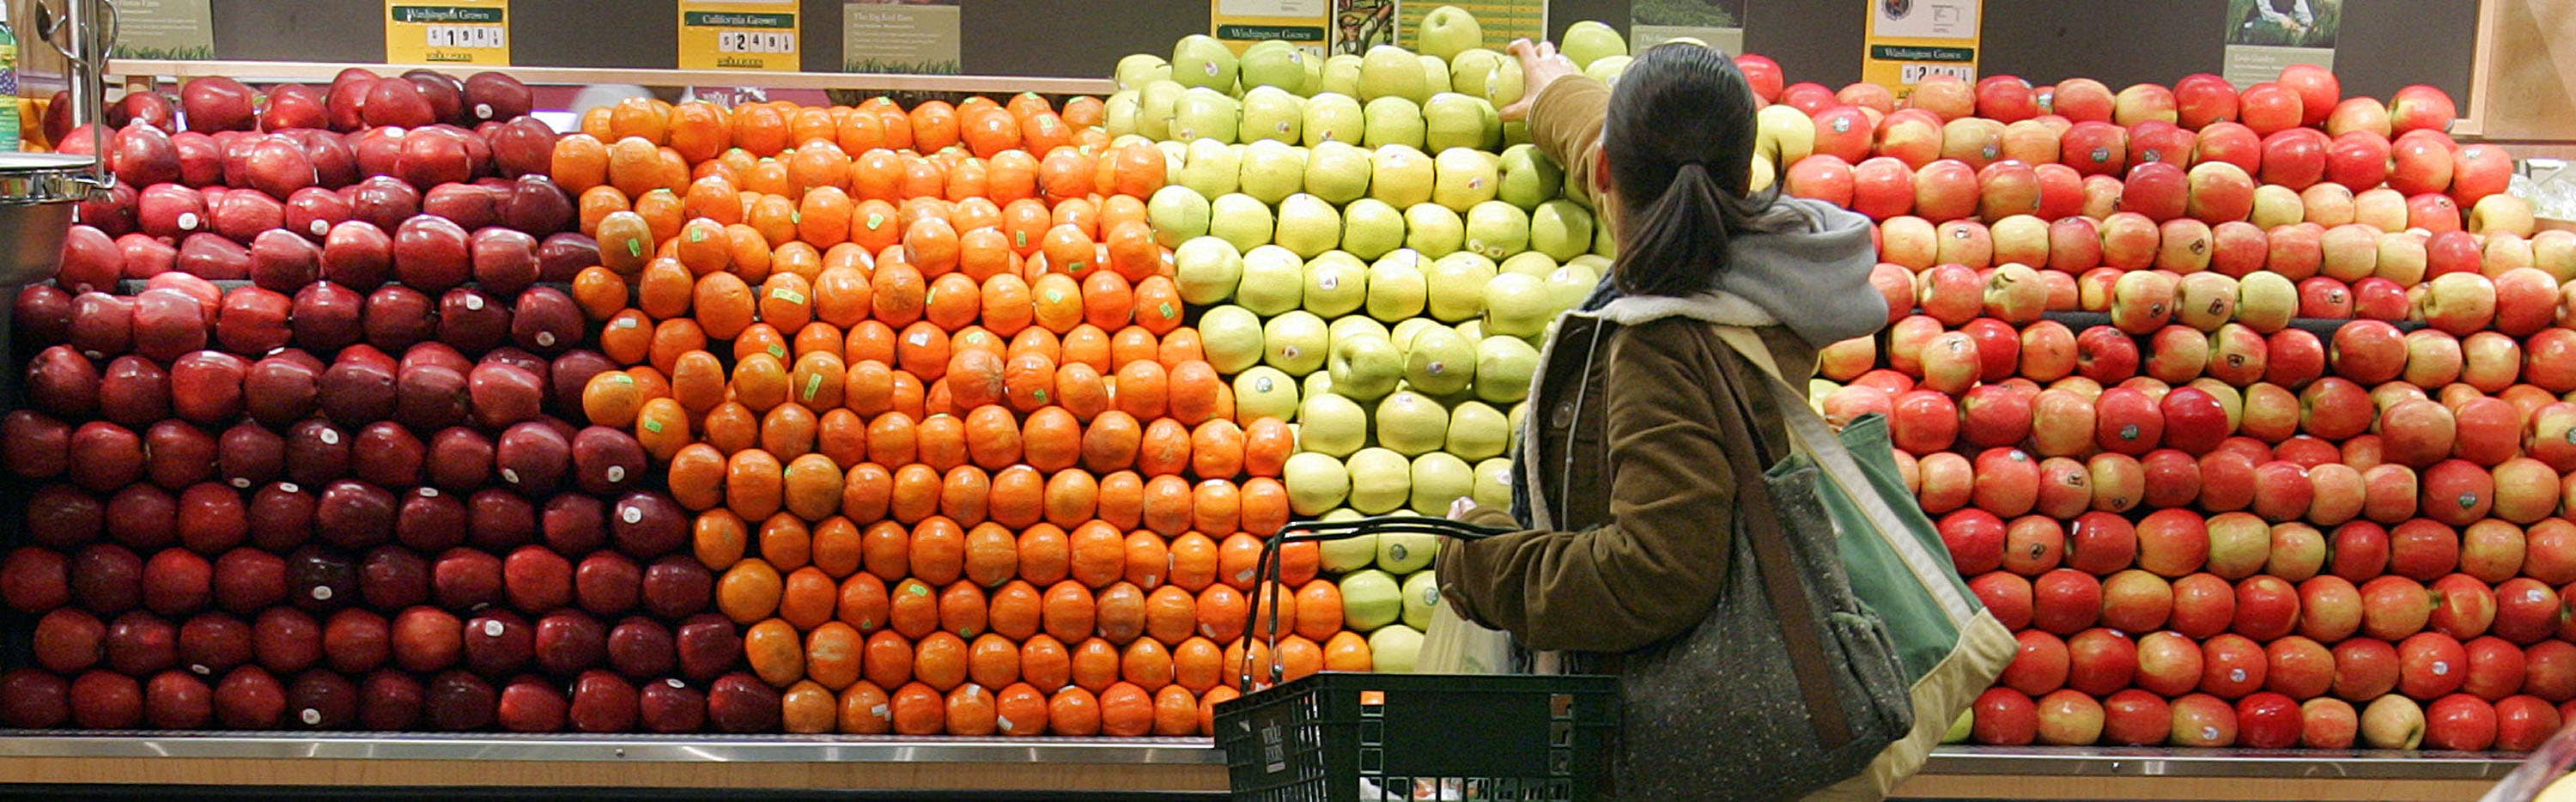 Person in the fruit aisle at grocery store